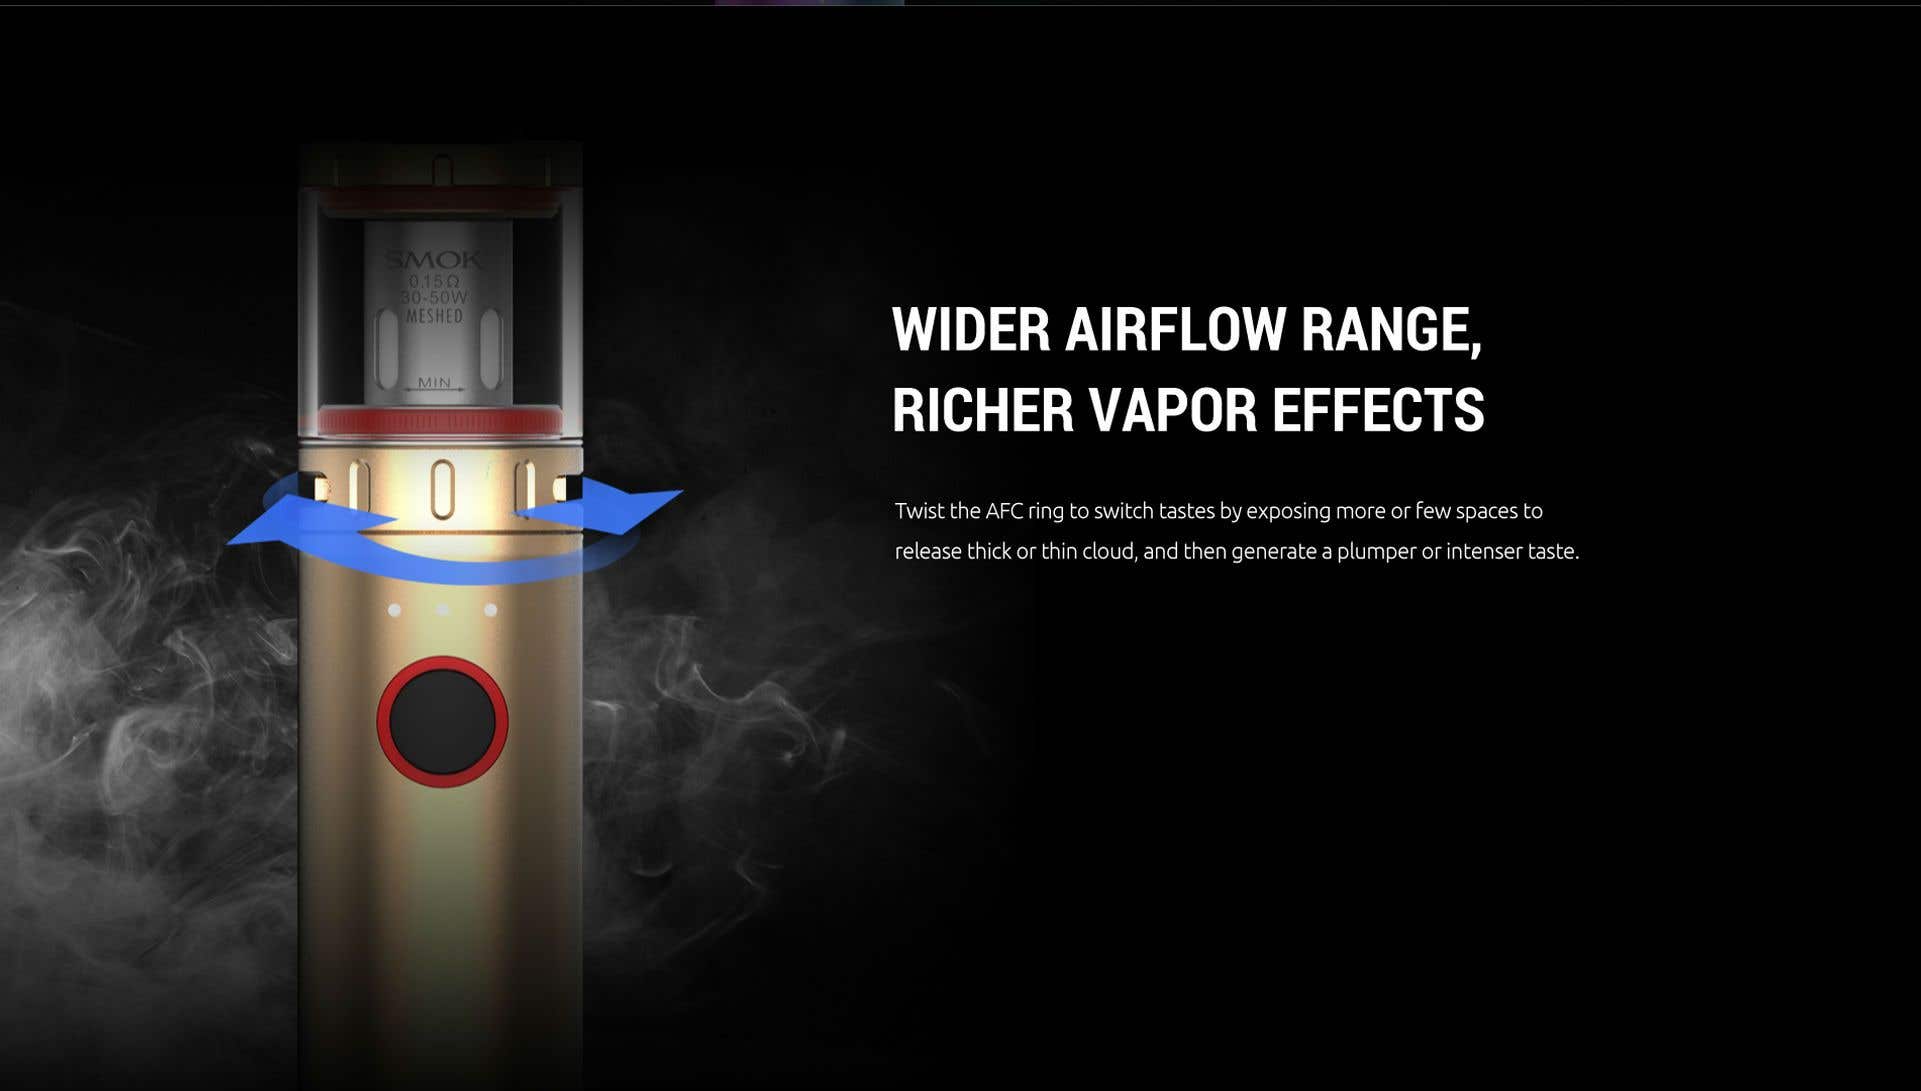 Simply twist the airflow control ring to adjust for more or less vapour